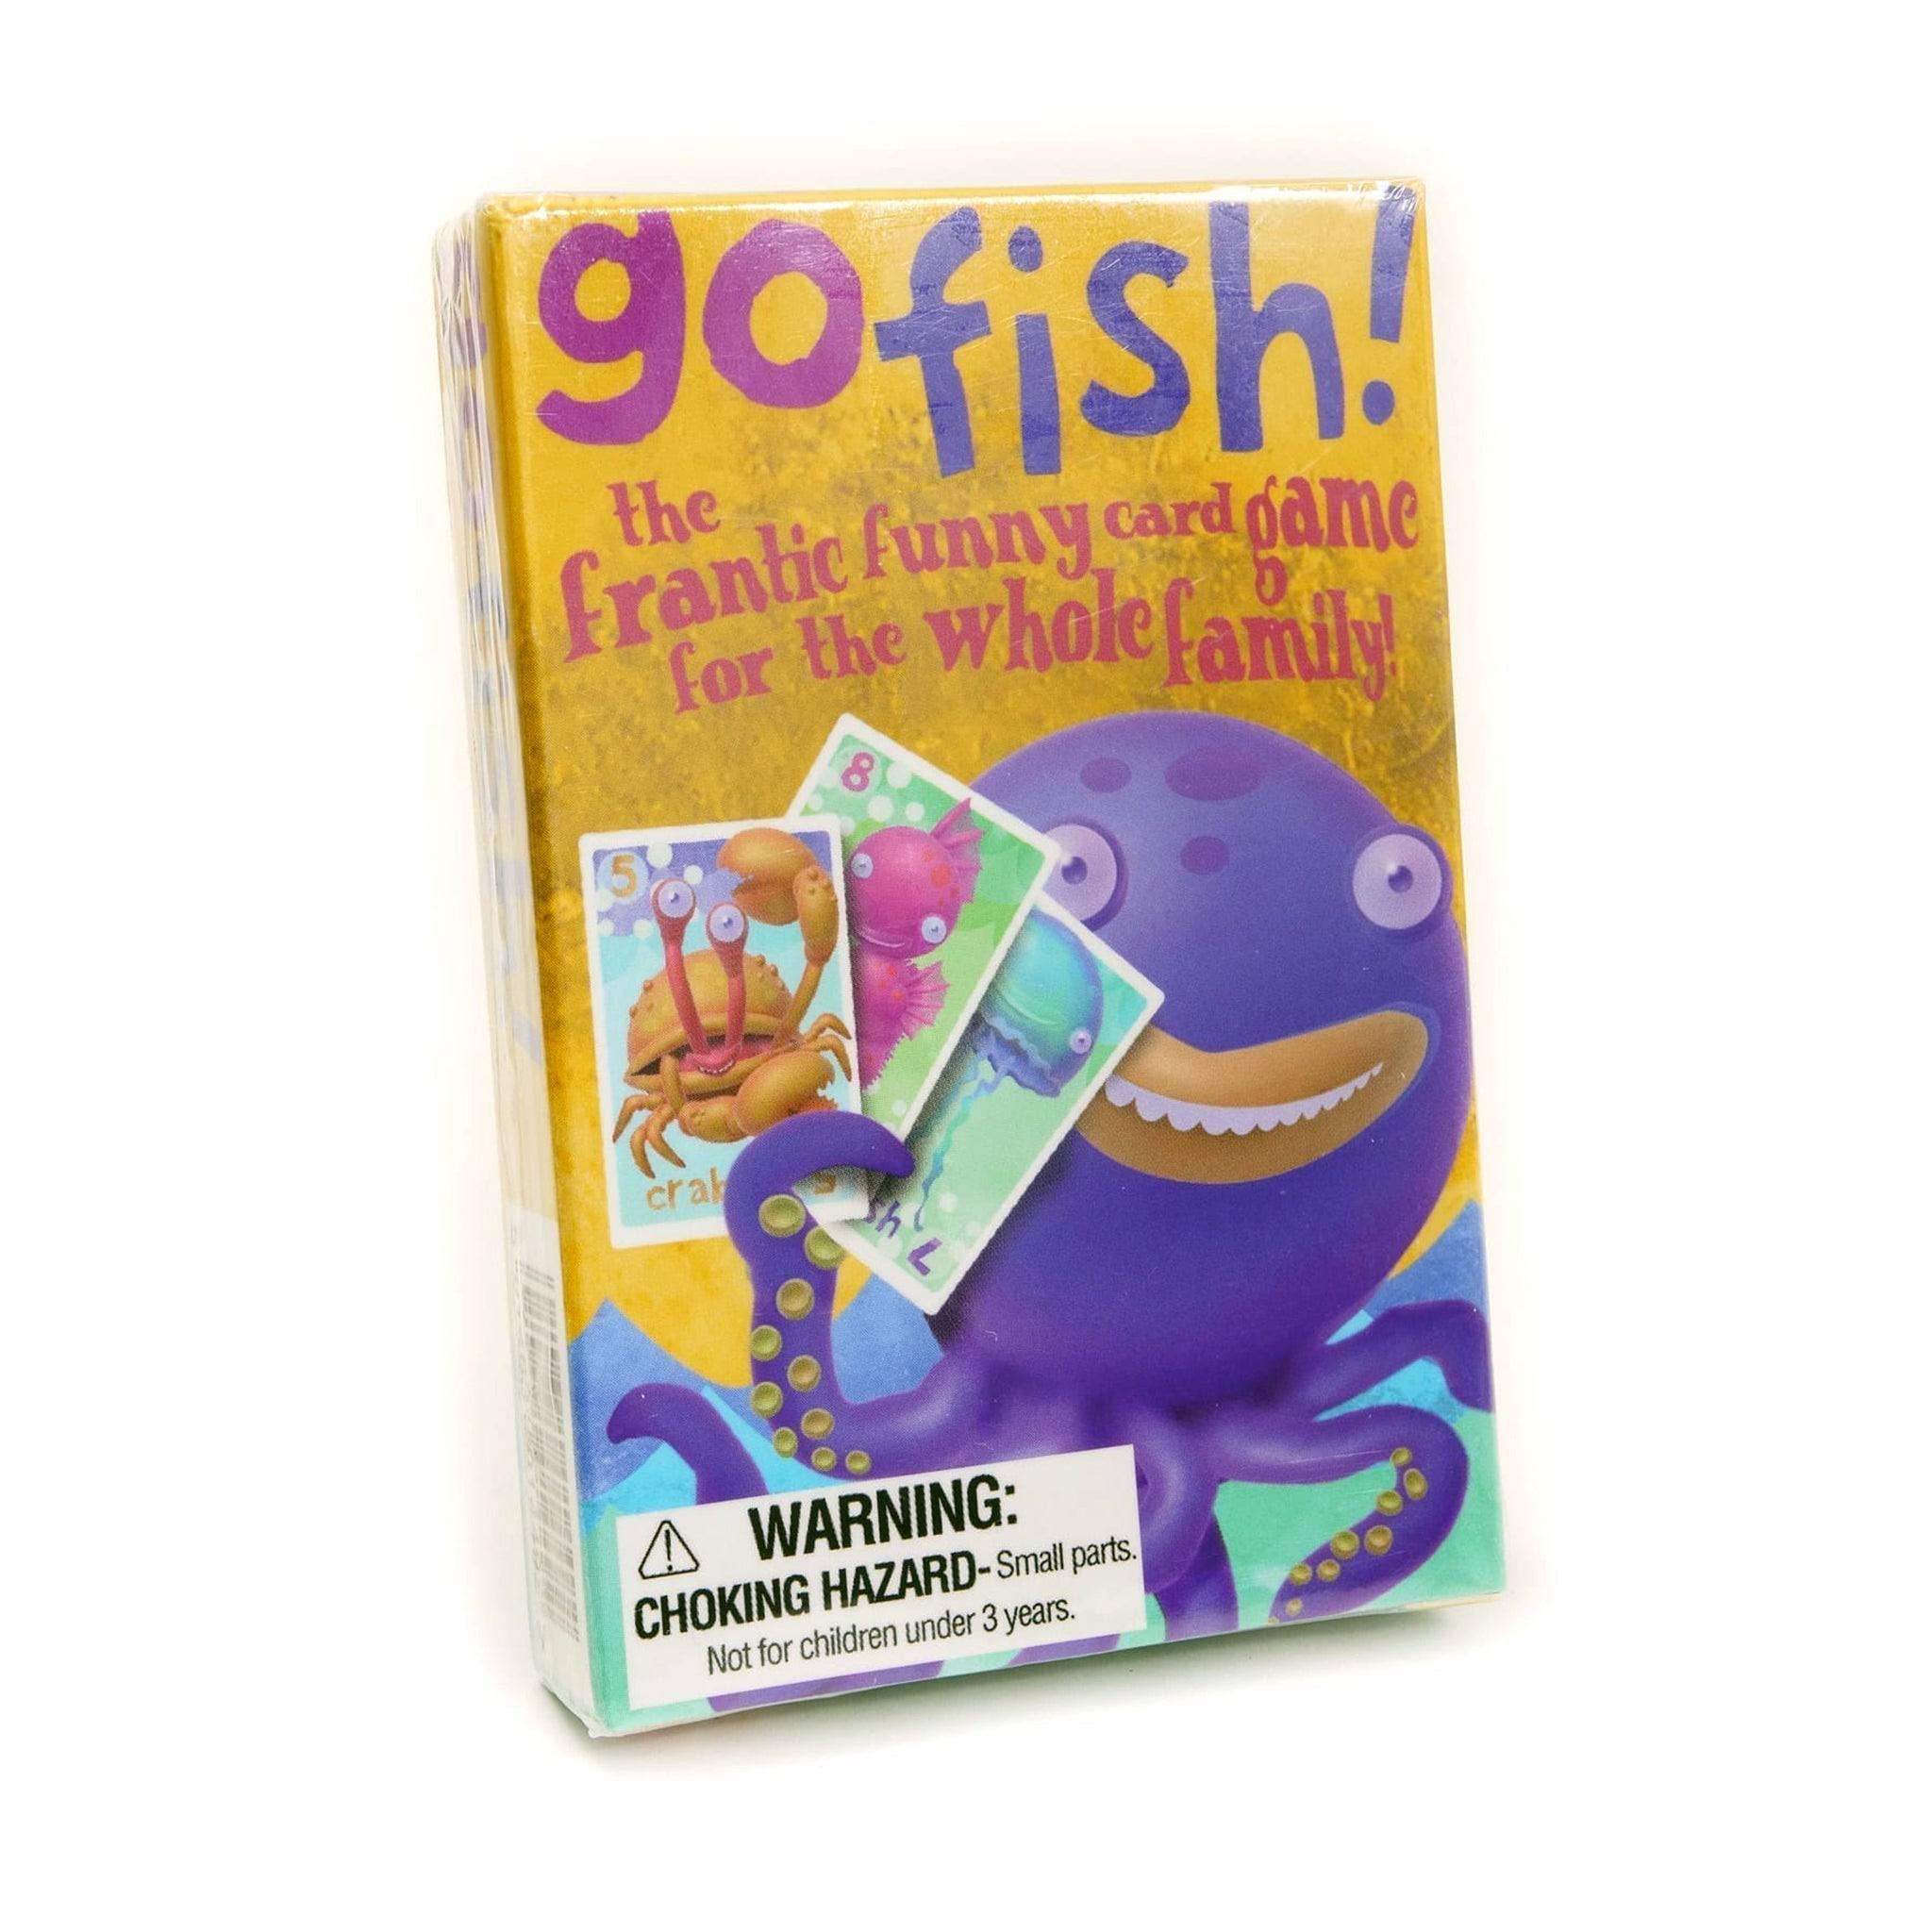 GO FISH CARD GAME - FUNNY FOR THE WHOLE FAMILY SEALIFE CREATURES TOYS